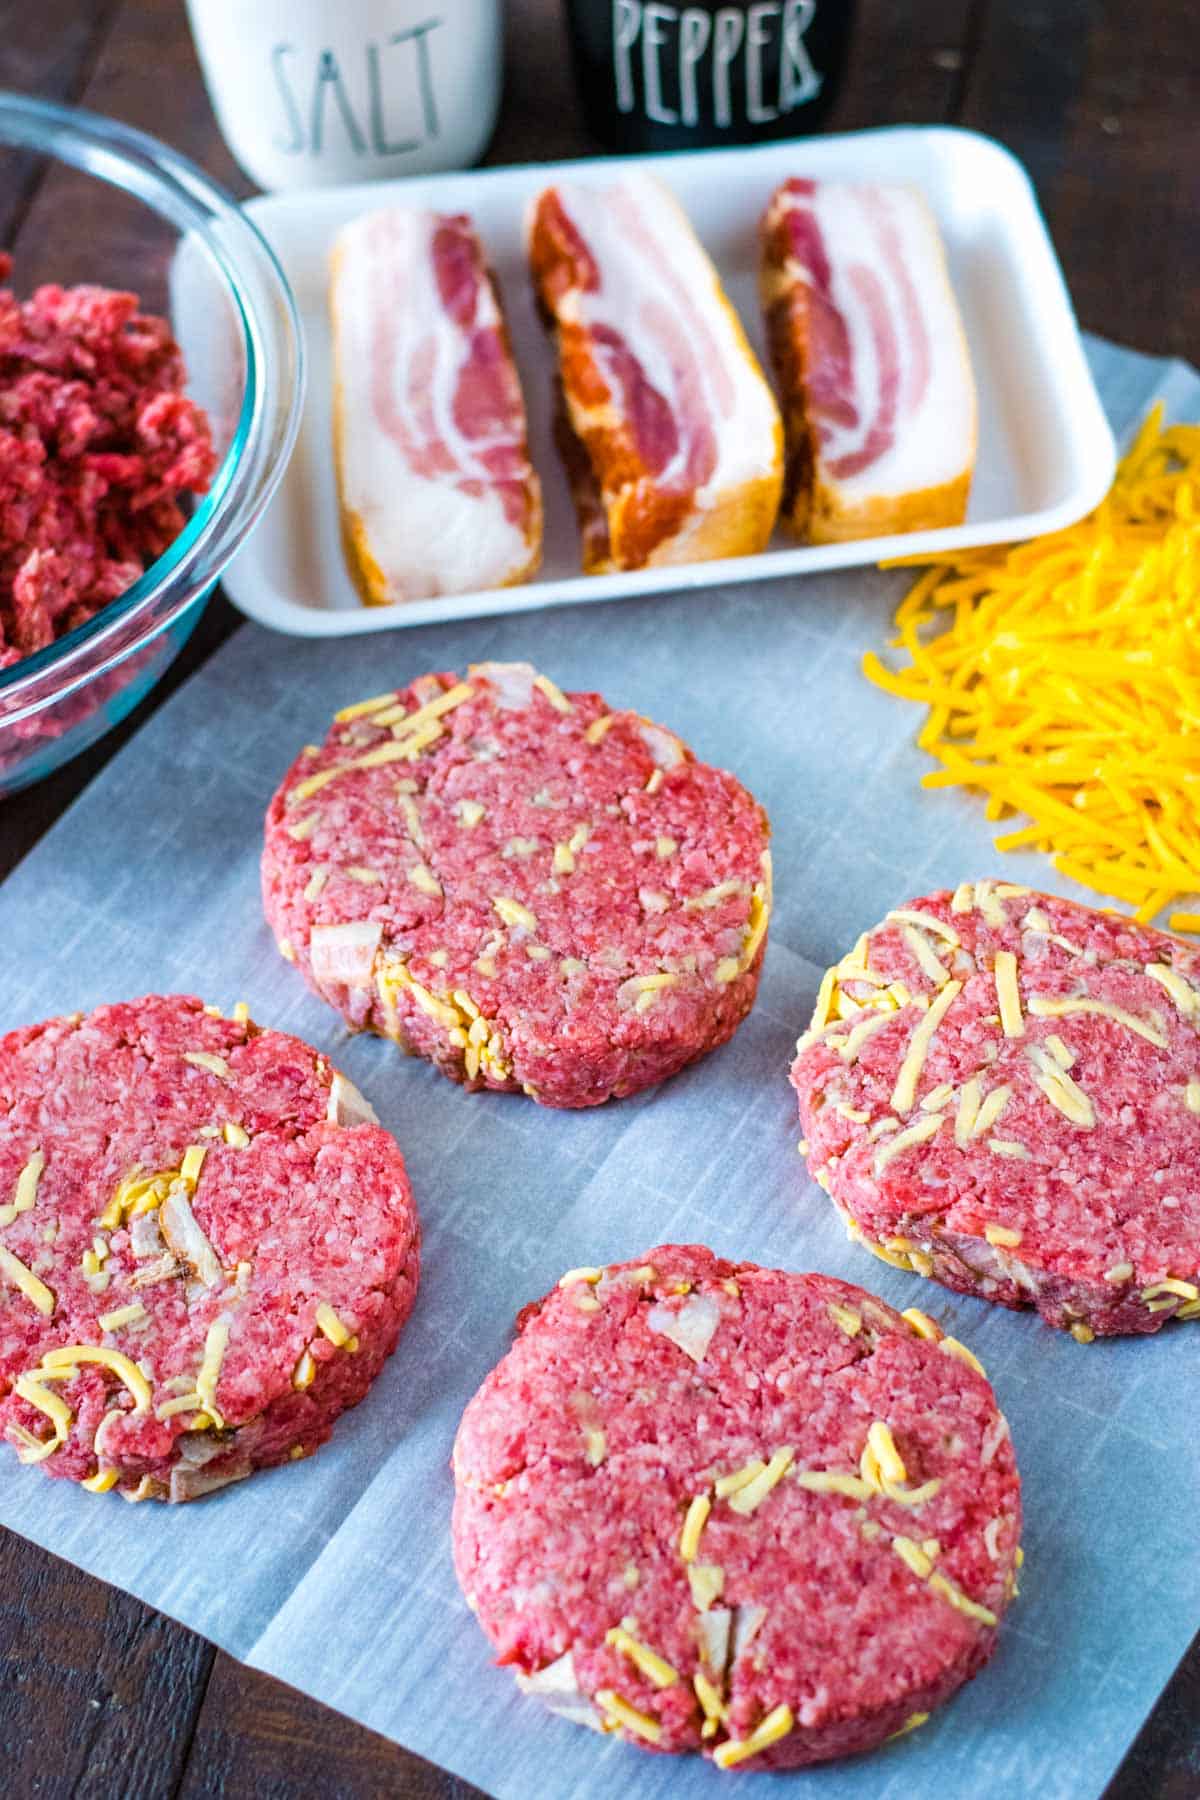 Stuffed bacon cheddar burger patties with all the ingredients needed to make in the background - ground round, bacon slices, cheddar cheese, salt, and pepper.